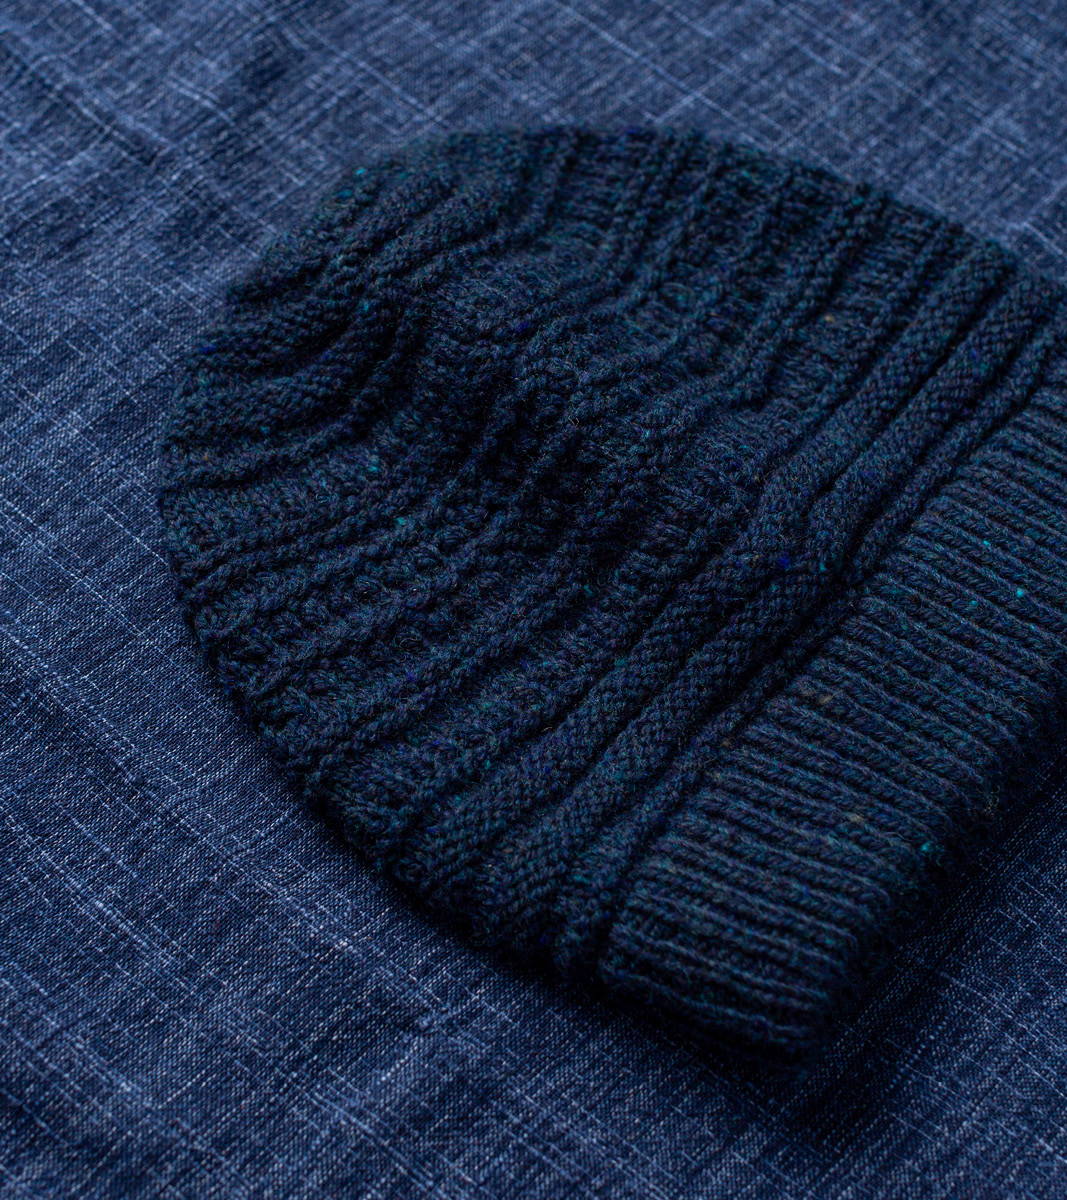 Brooklyn Tweed's Grist Hat hand knit in Imbue Sport yarn color Boro